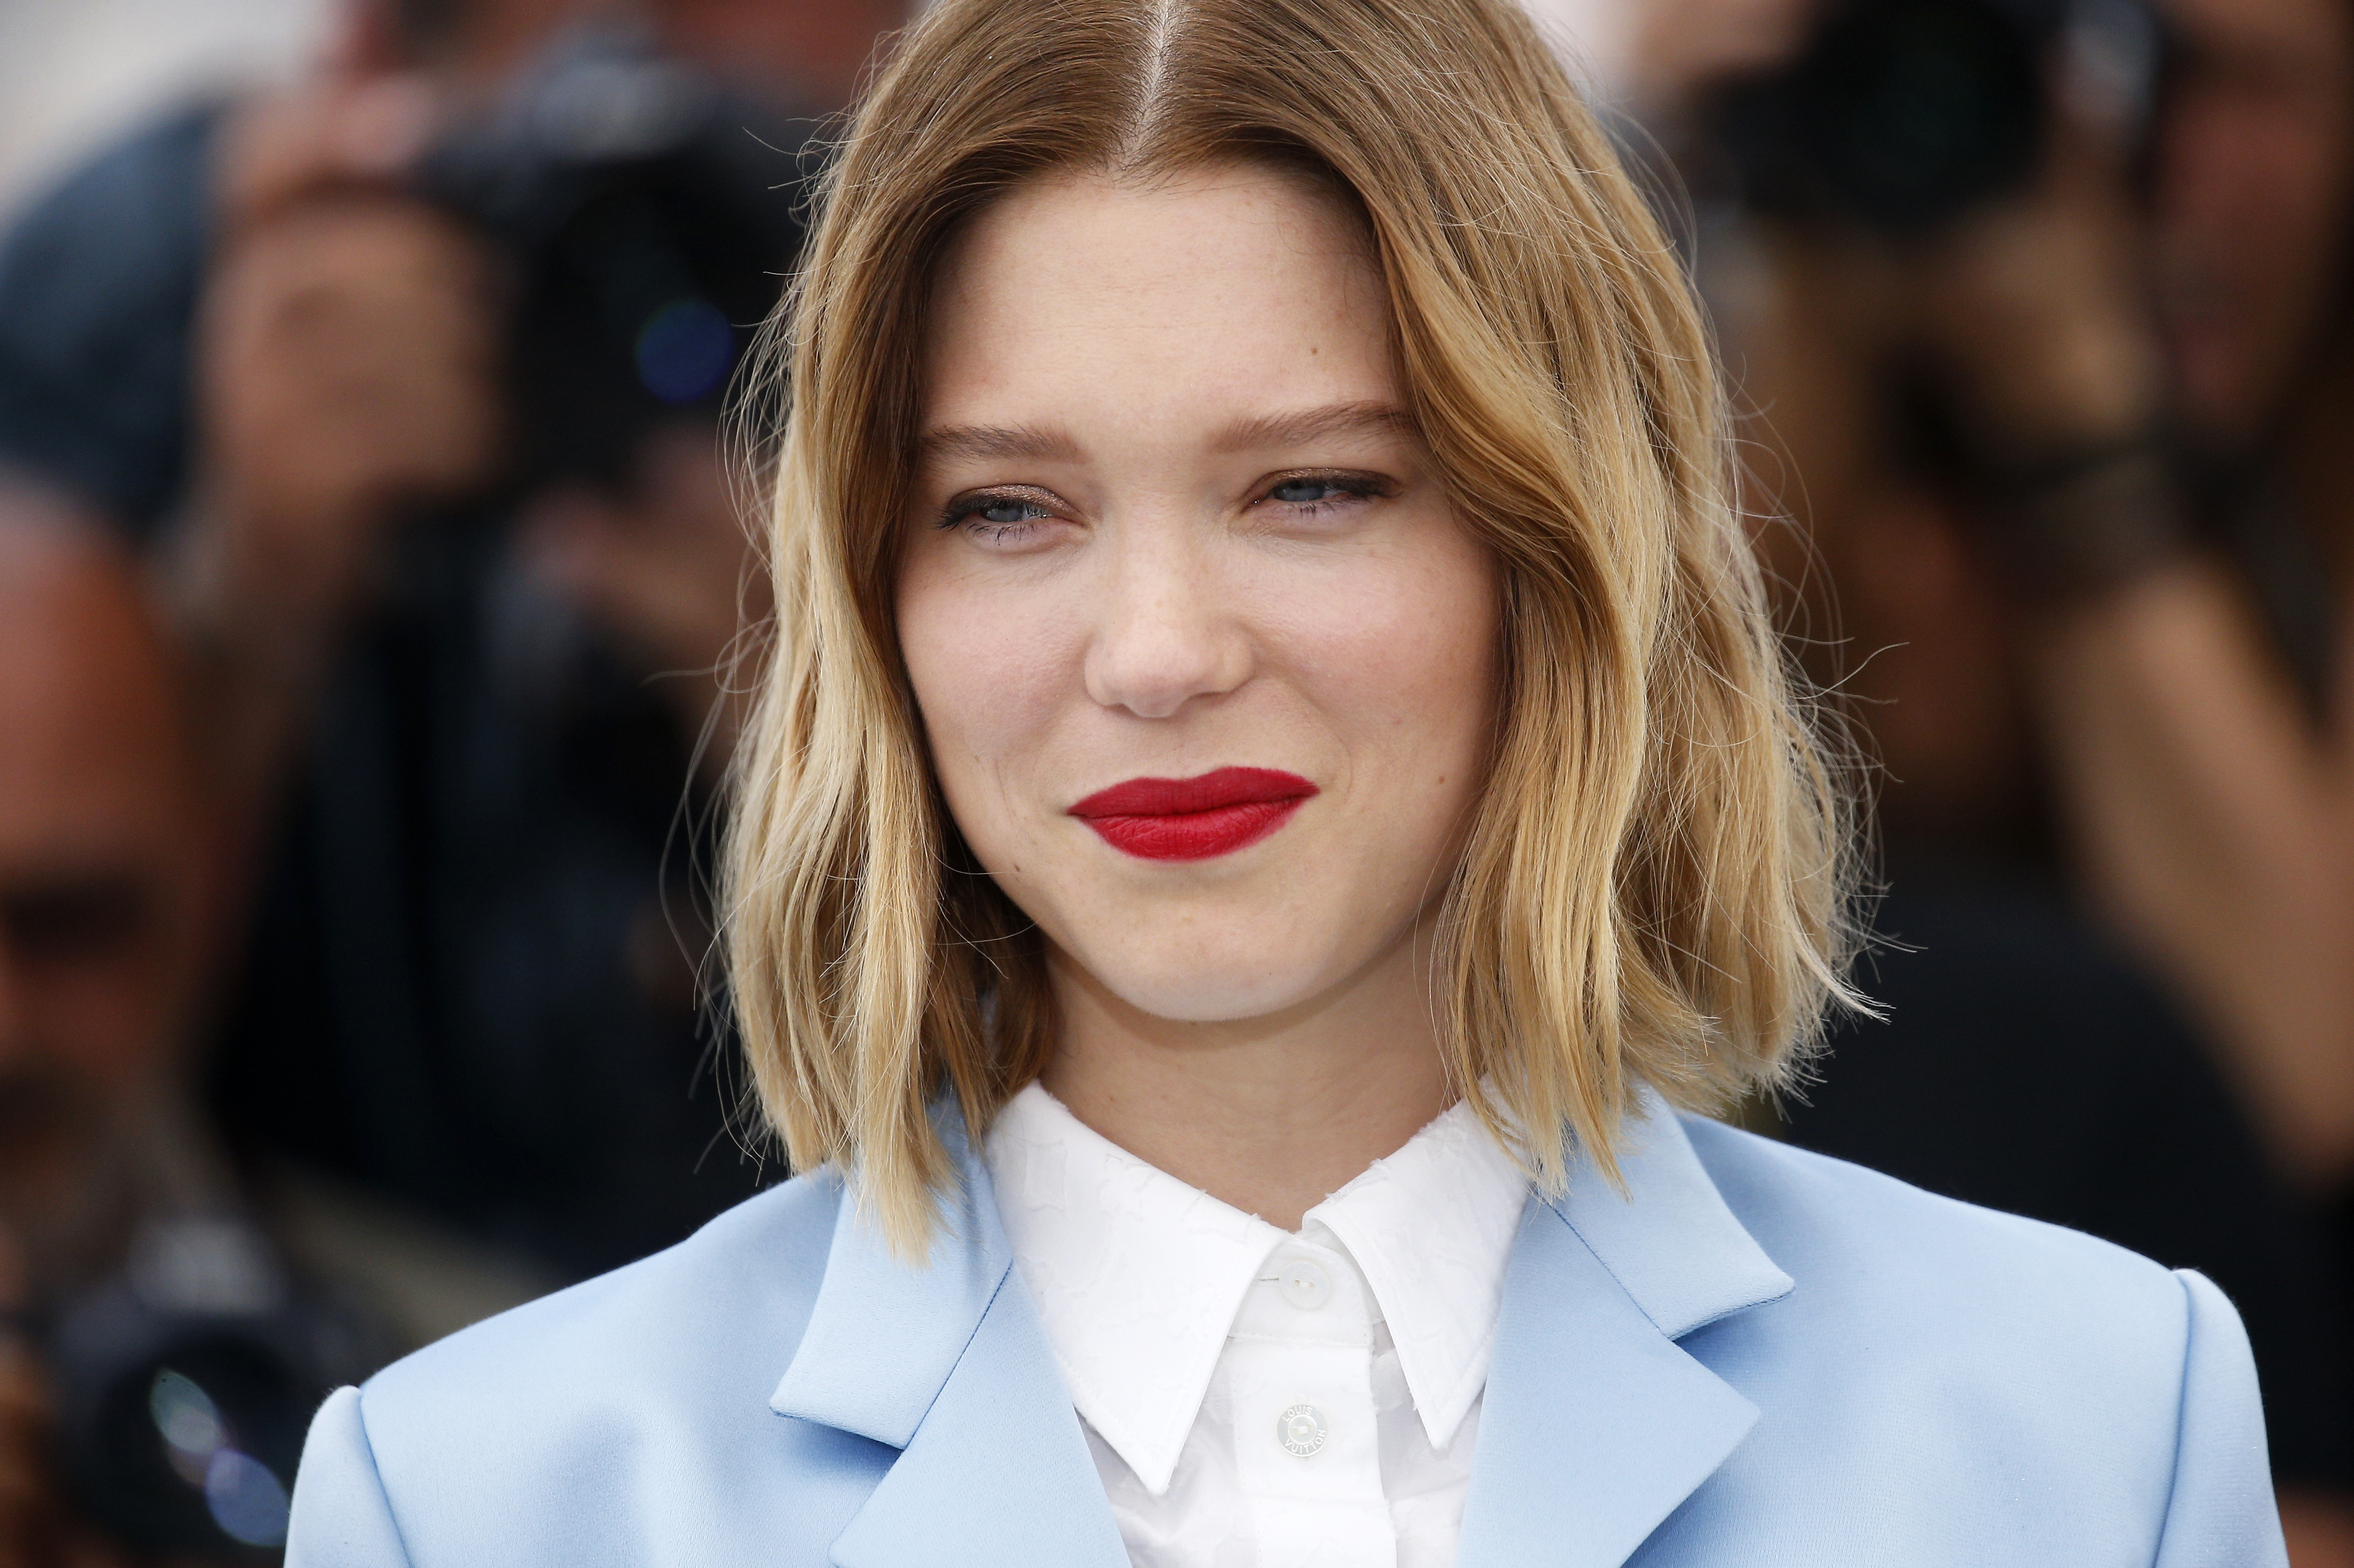 Actress Seydoux tests COVID positive ahead of Cannes appearances